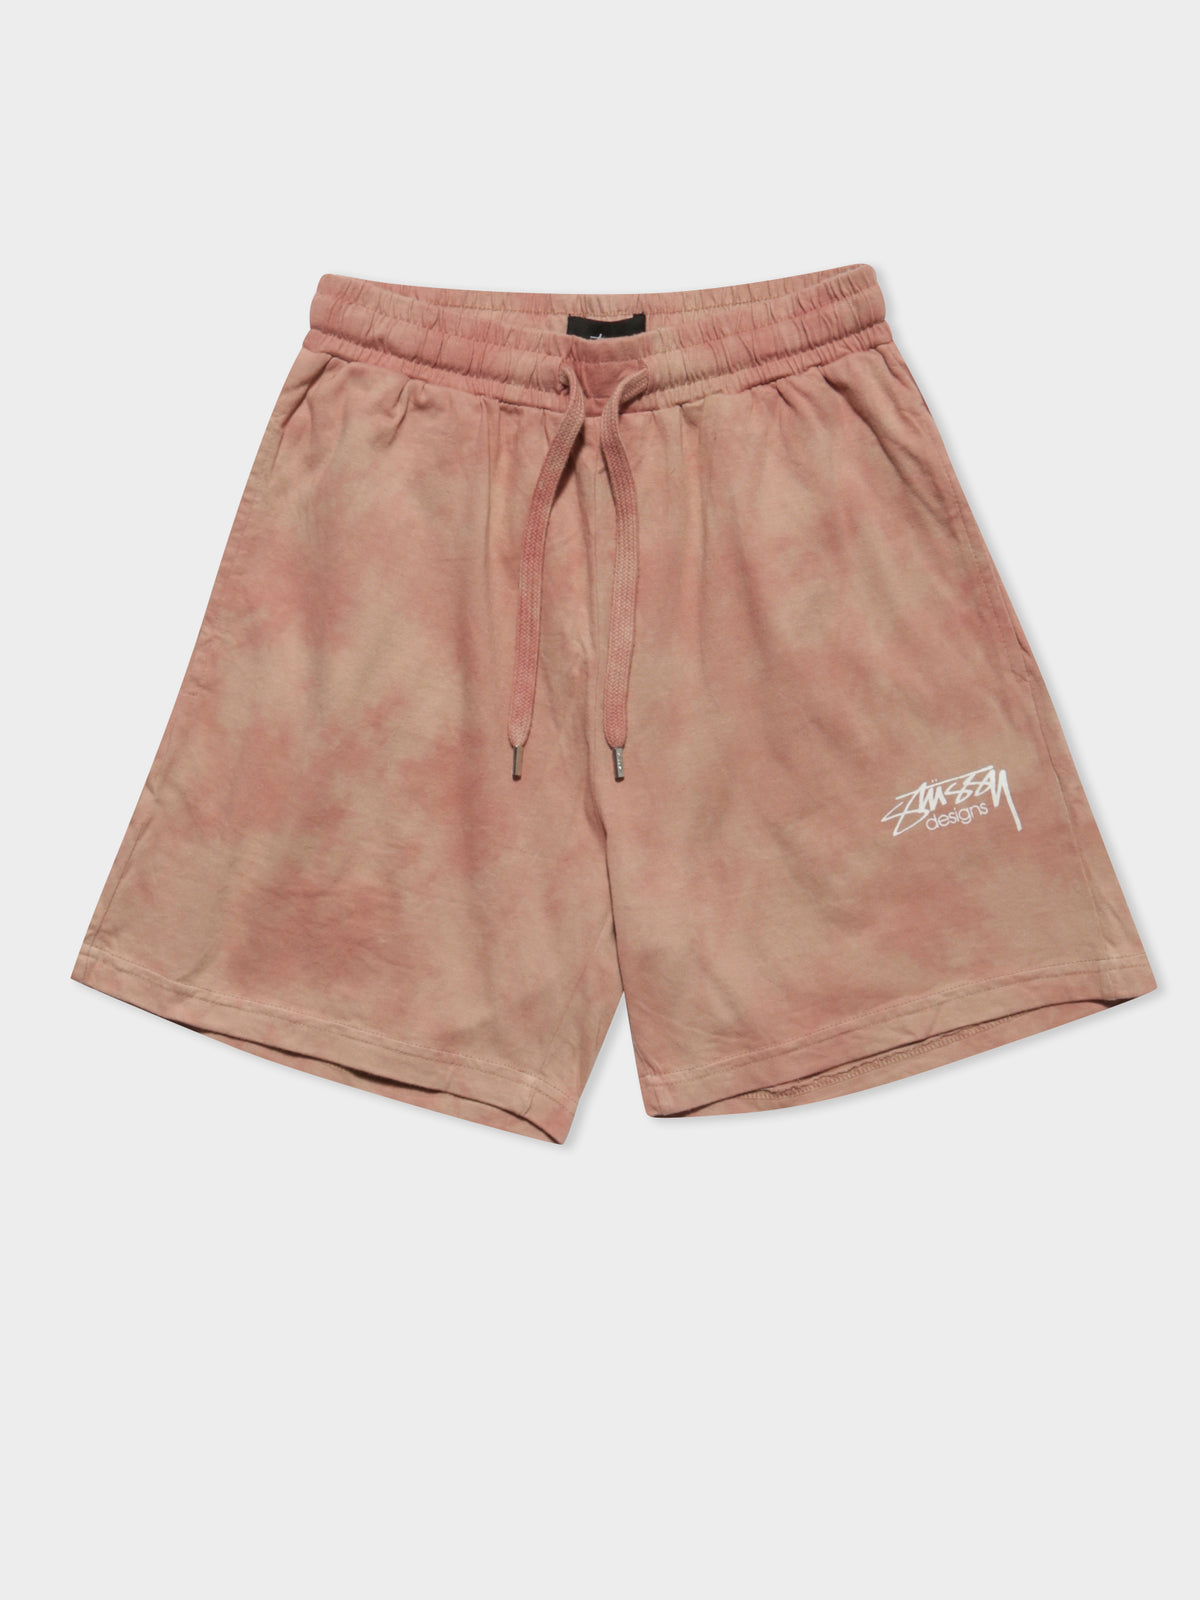 Designs Rugby Shorts in Pink